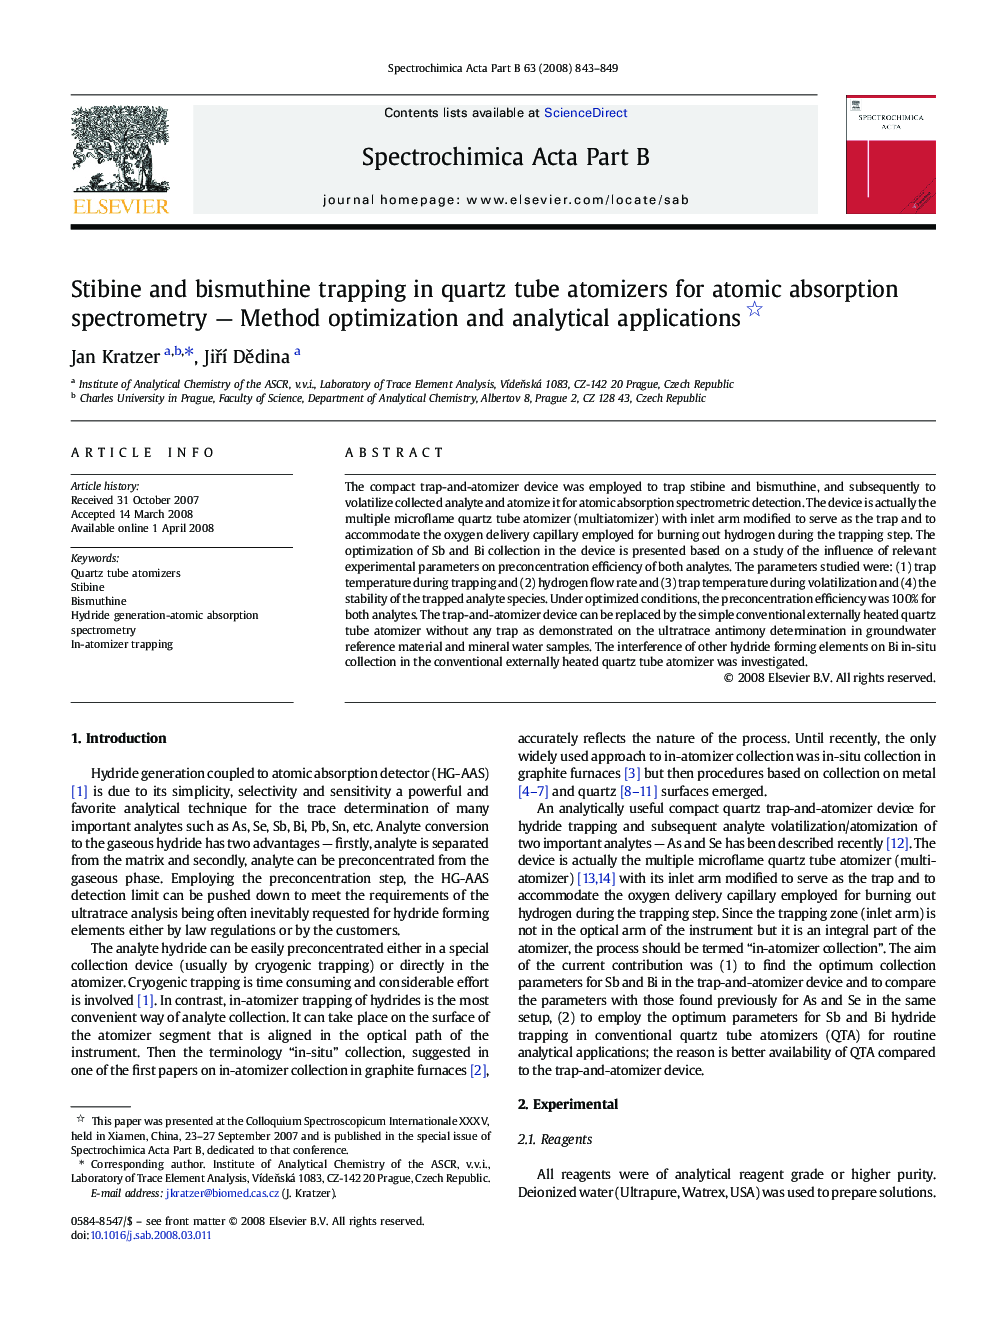 Stibine and bismuthine trapping in quartz tube atomizers for atomic absorption spectrometry - Method optimization and analytical applications